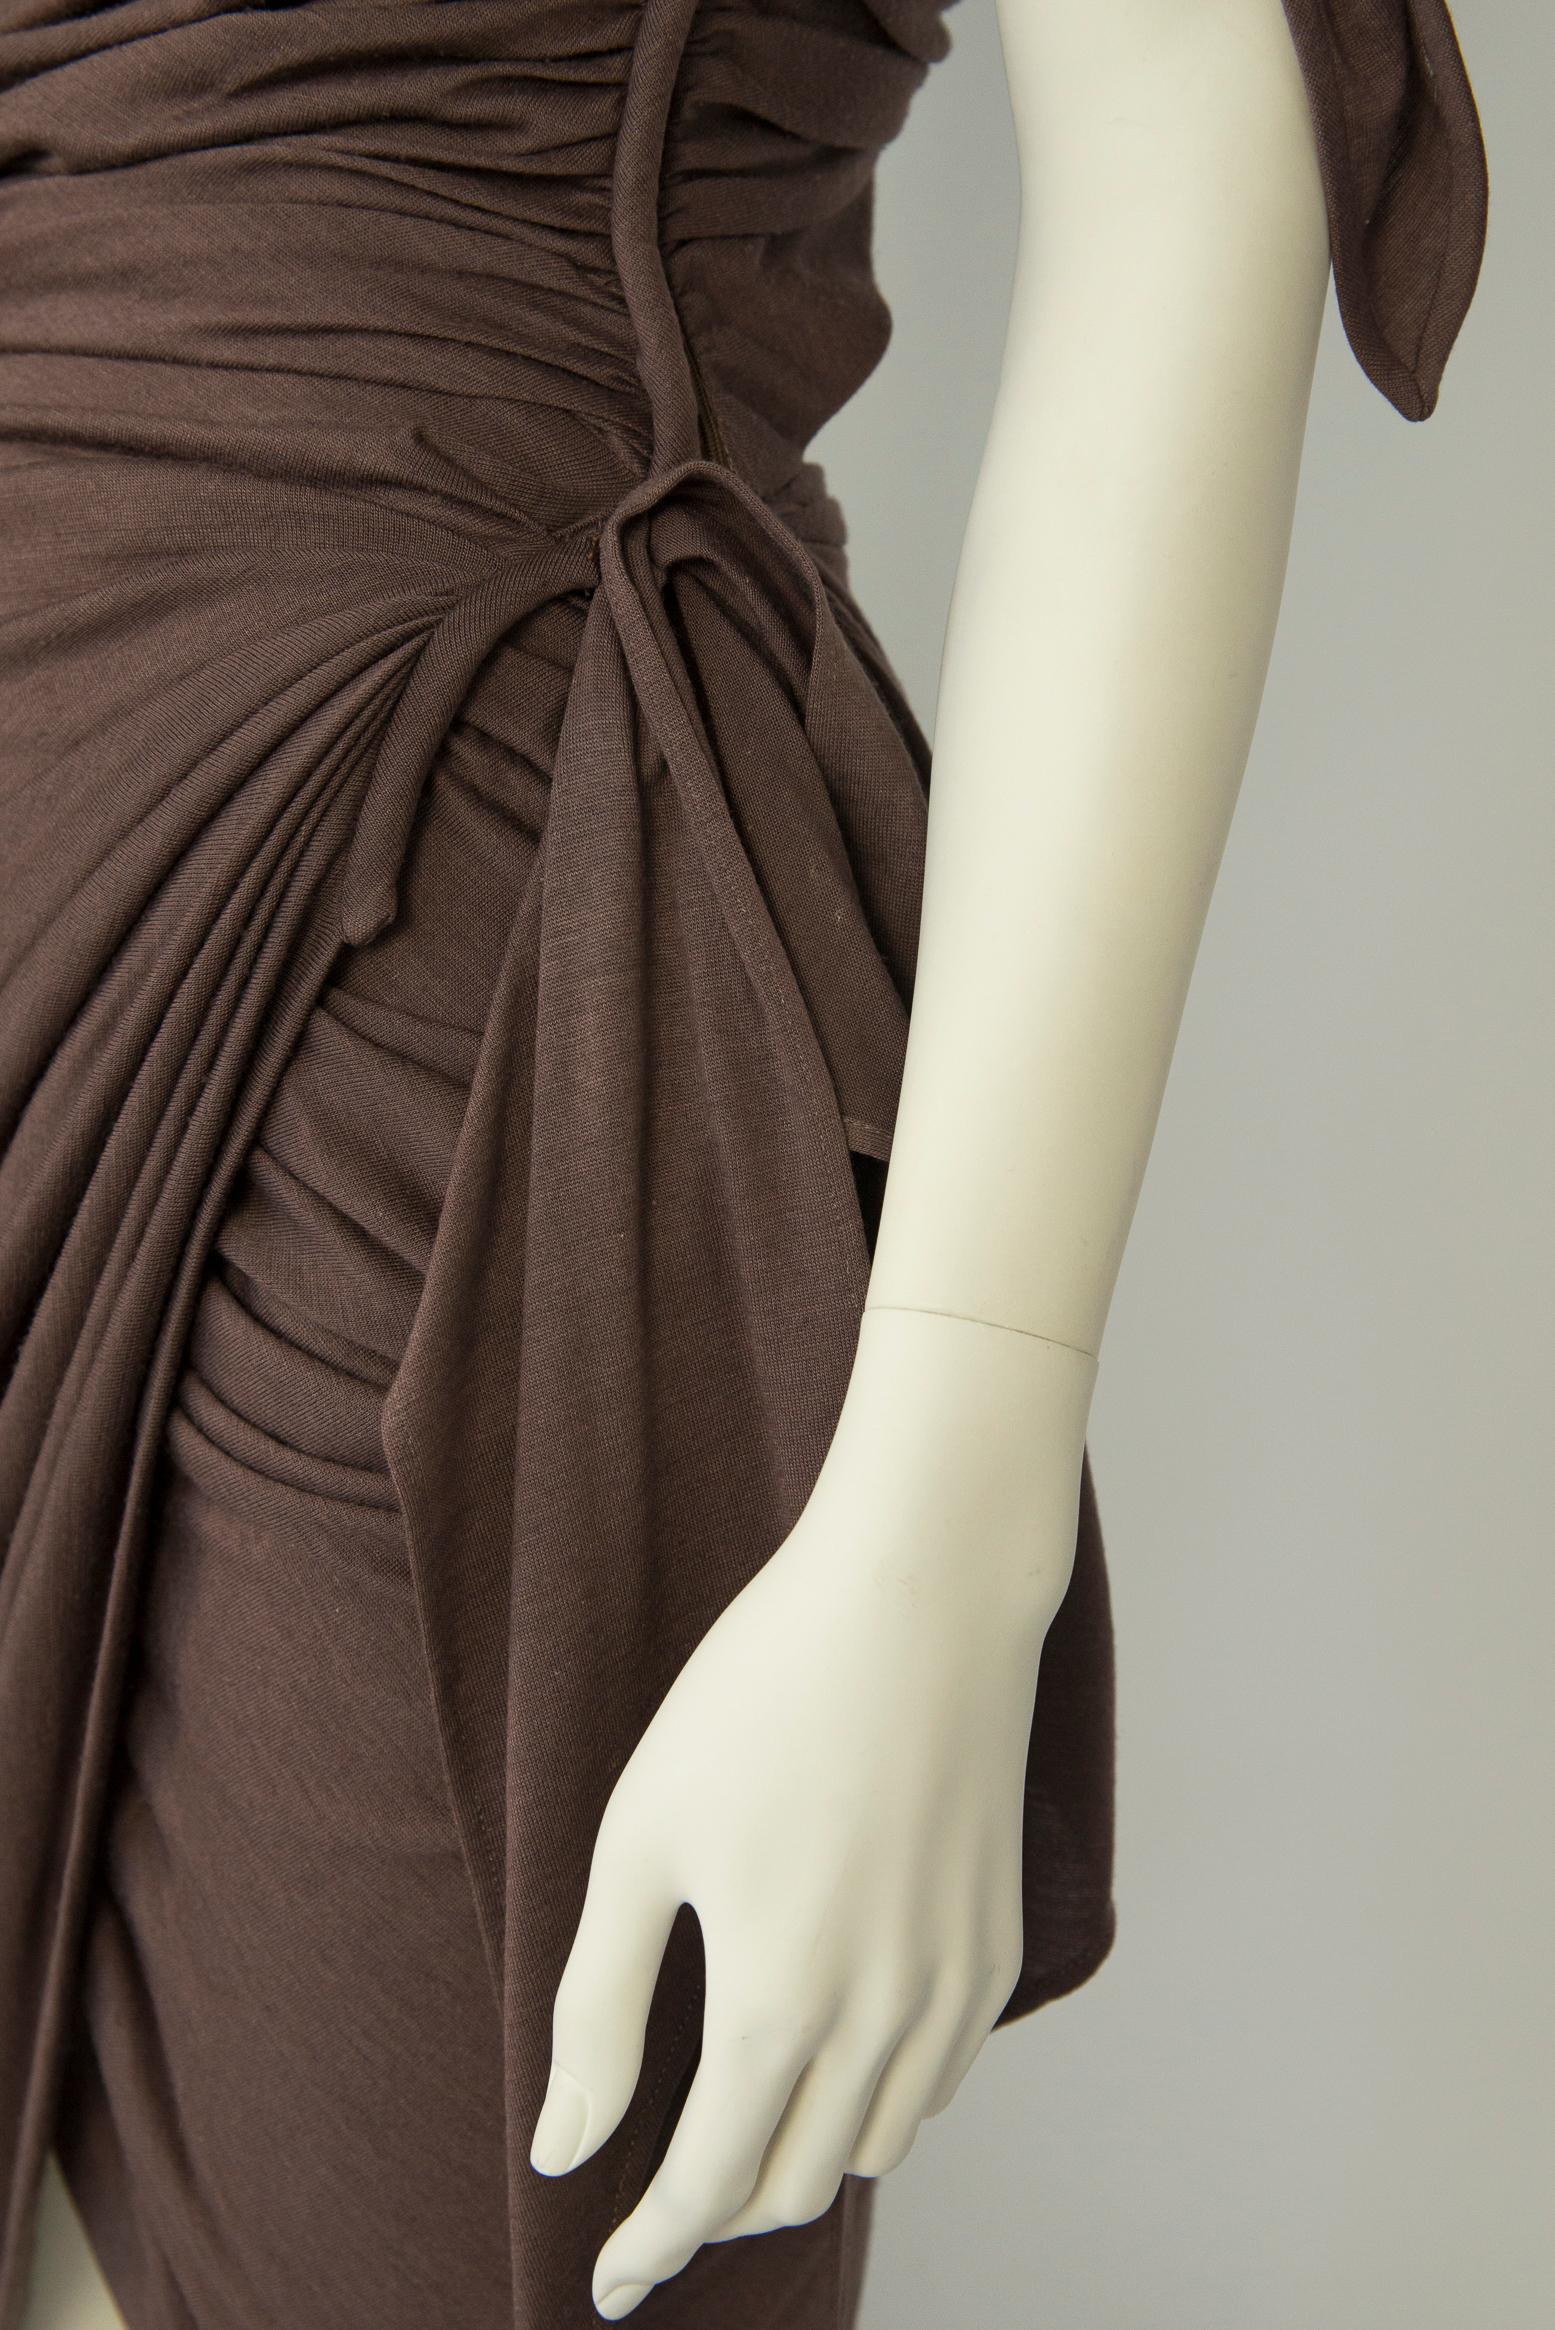 Emanuel Ungaro Draped Knotted Cut-Out Cocktail Dress, Circa 1985 For Sale 10